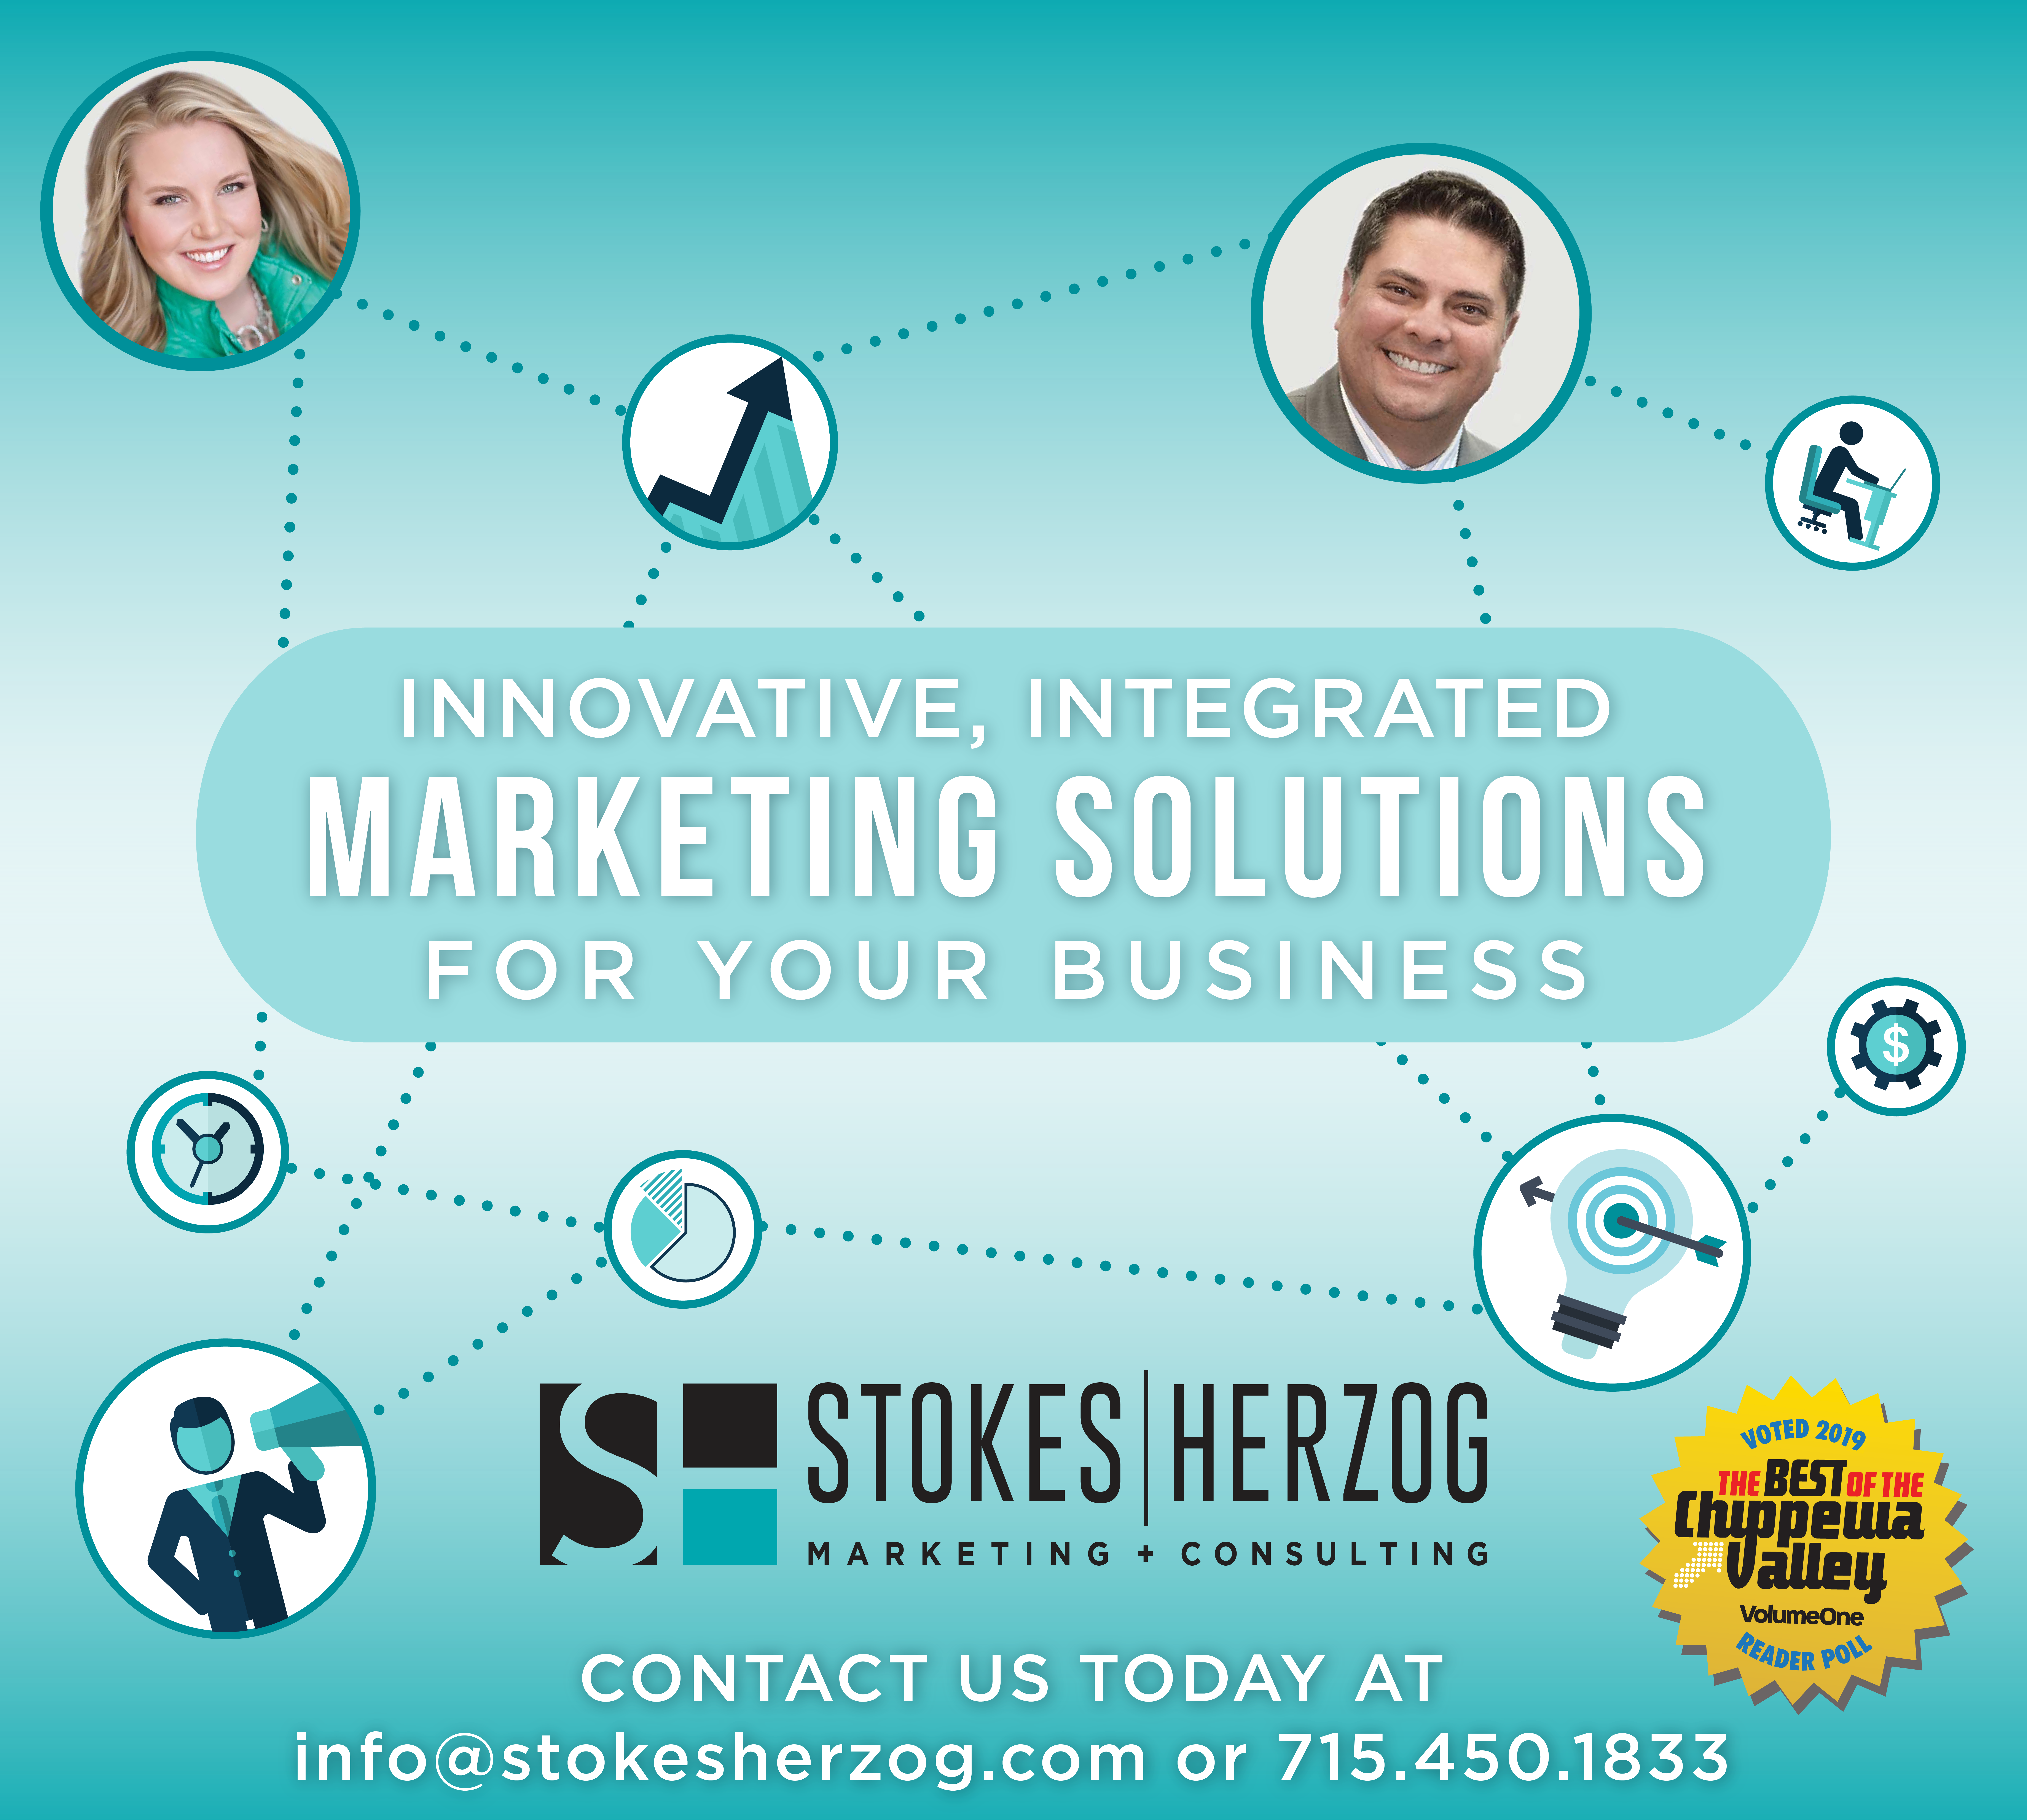 STOKES|HERZOG Marketing and Consulting